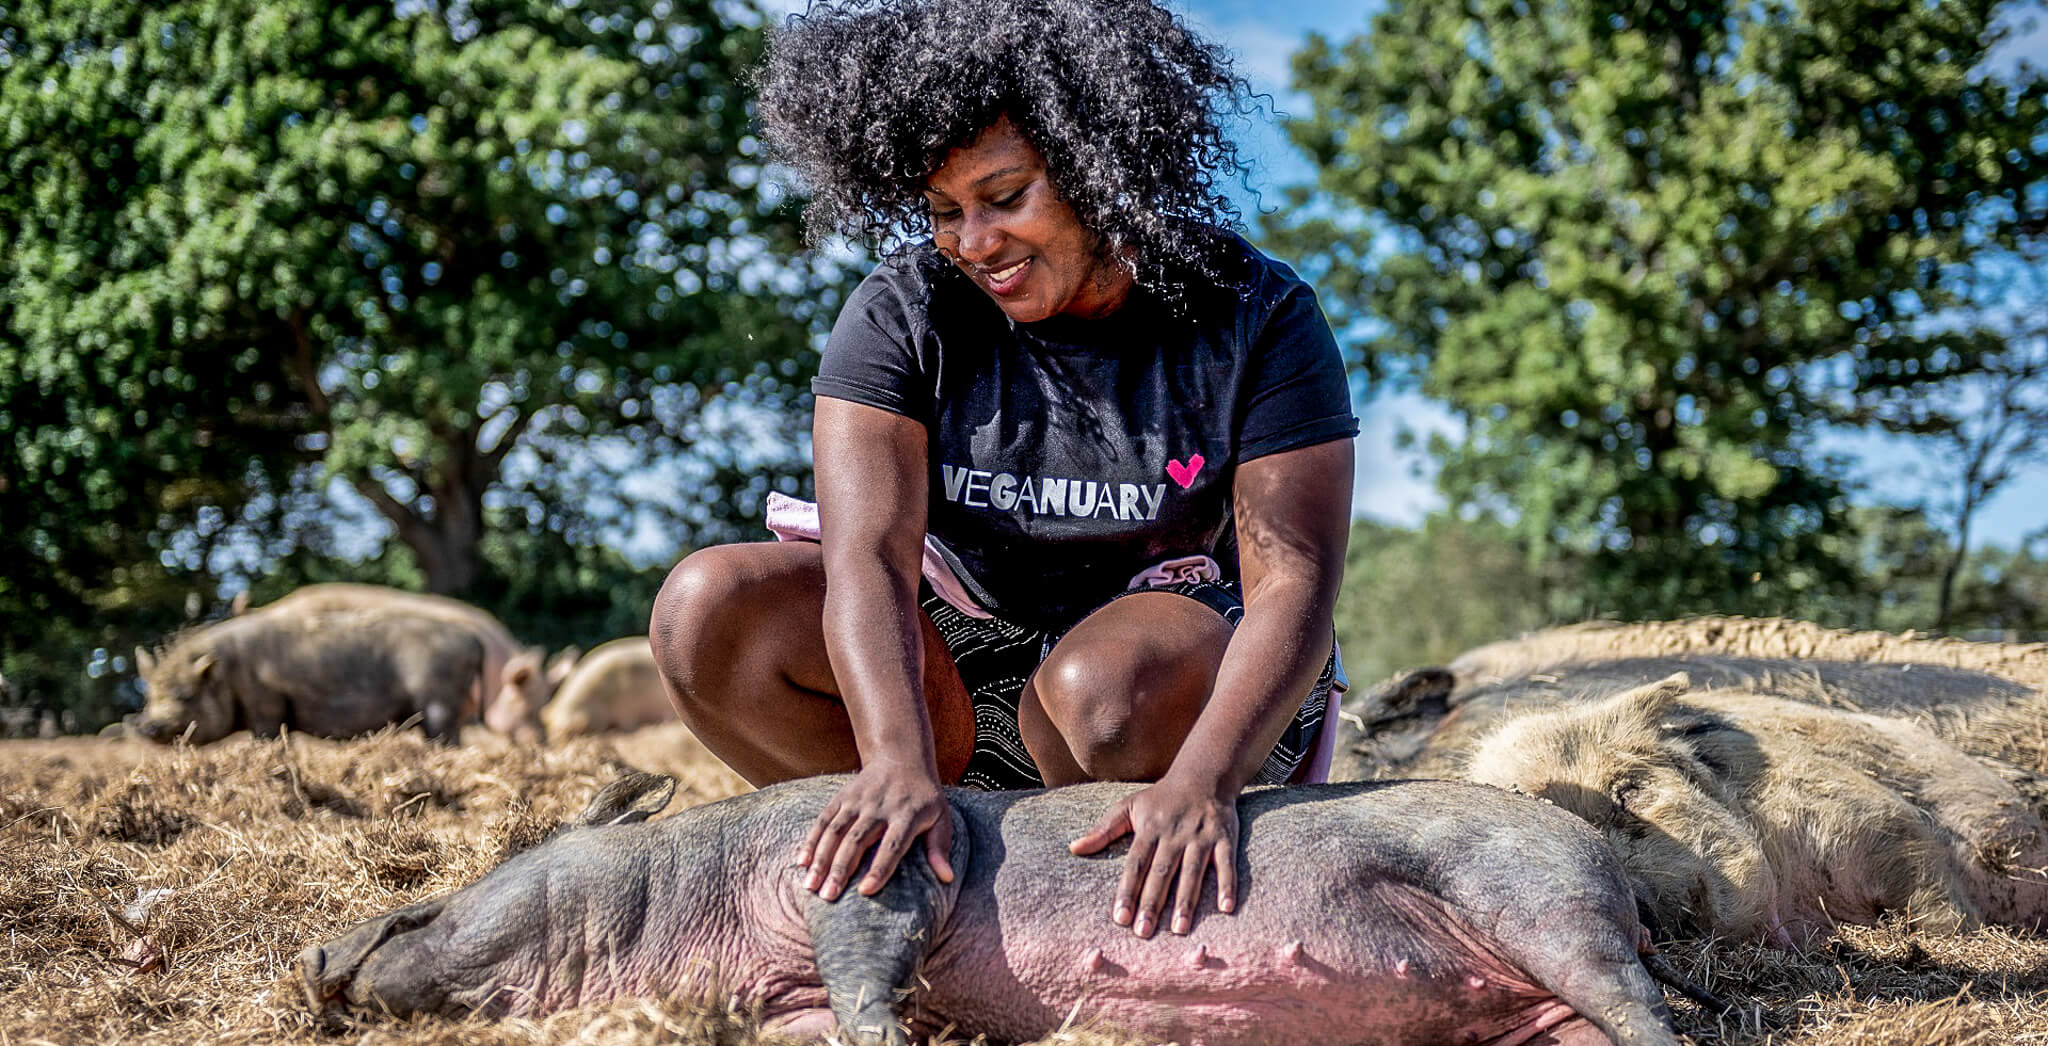 Woman with Veganuary t-shirt is committed to animal welfare.